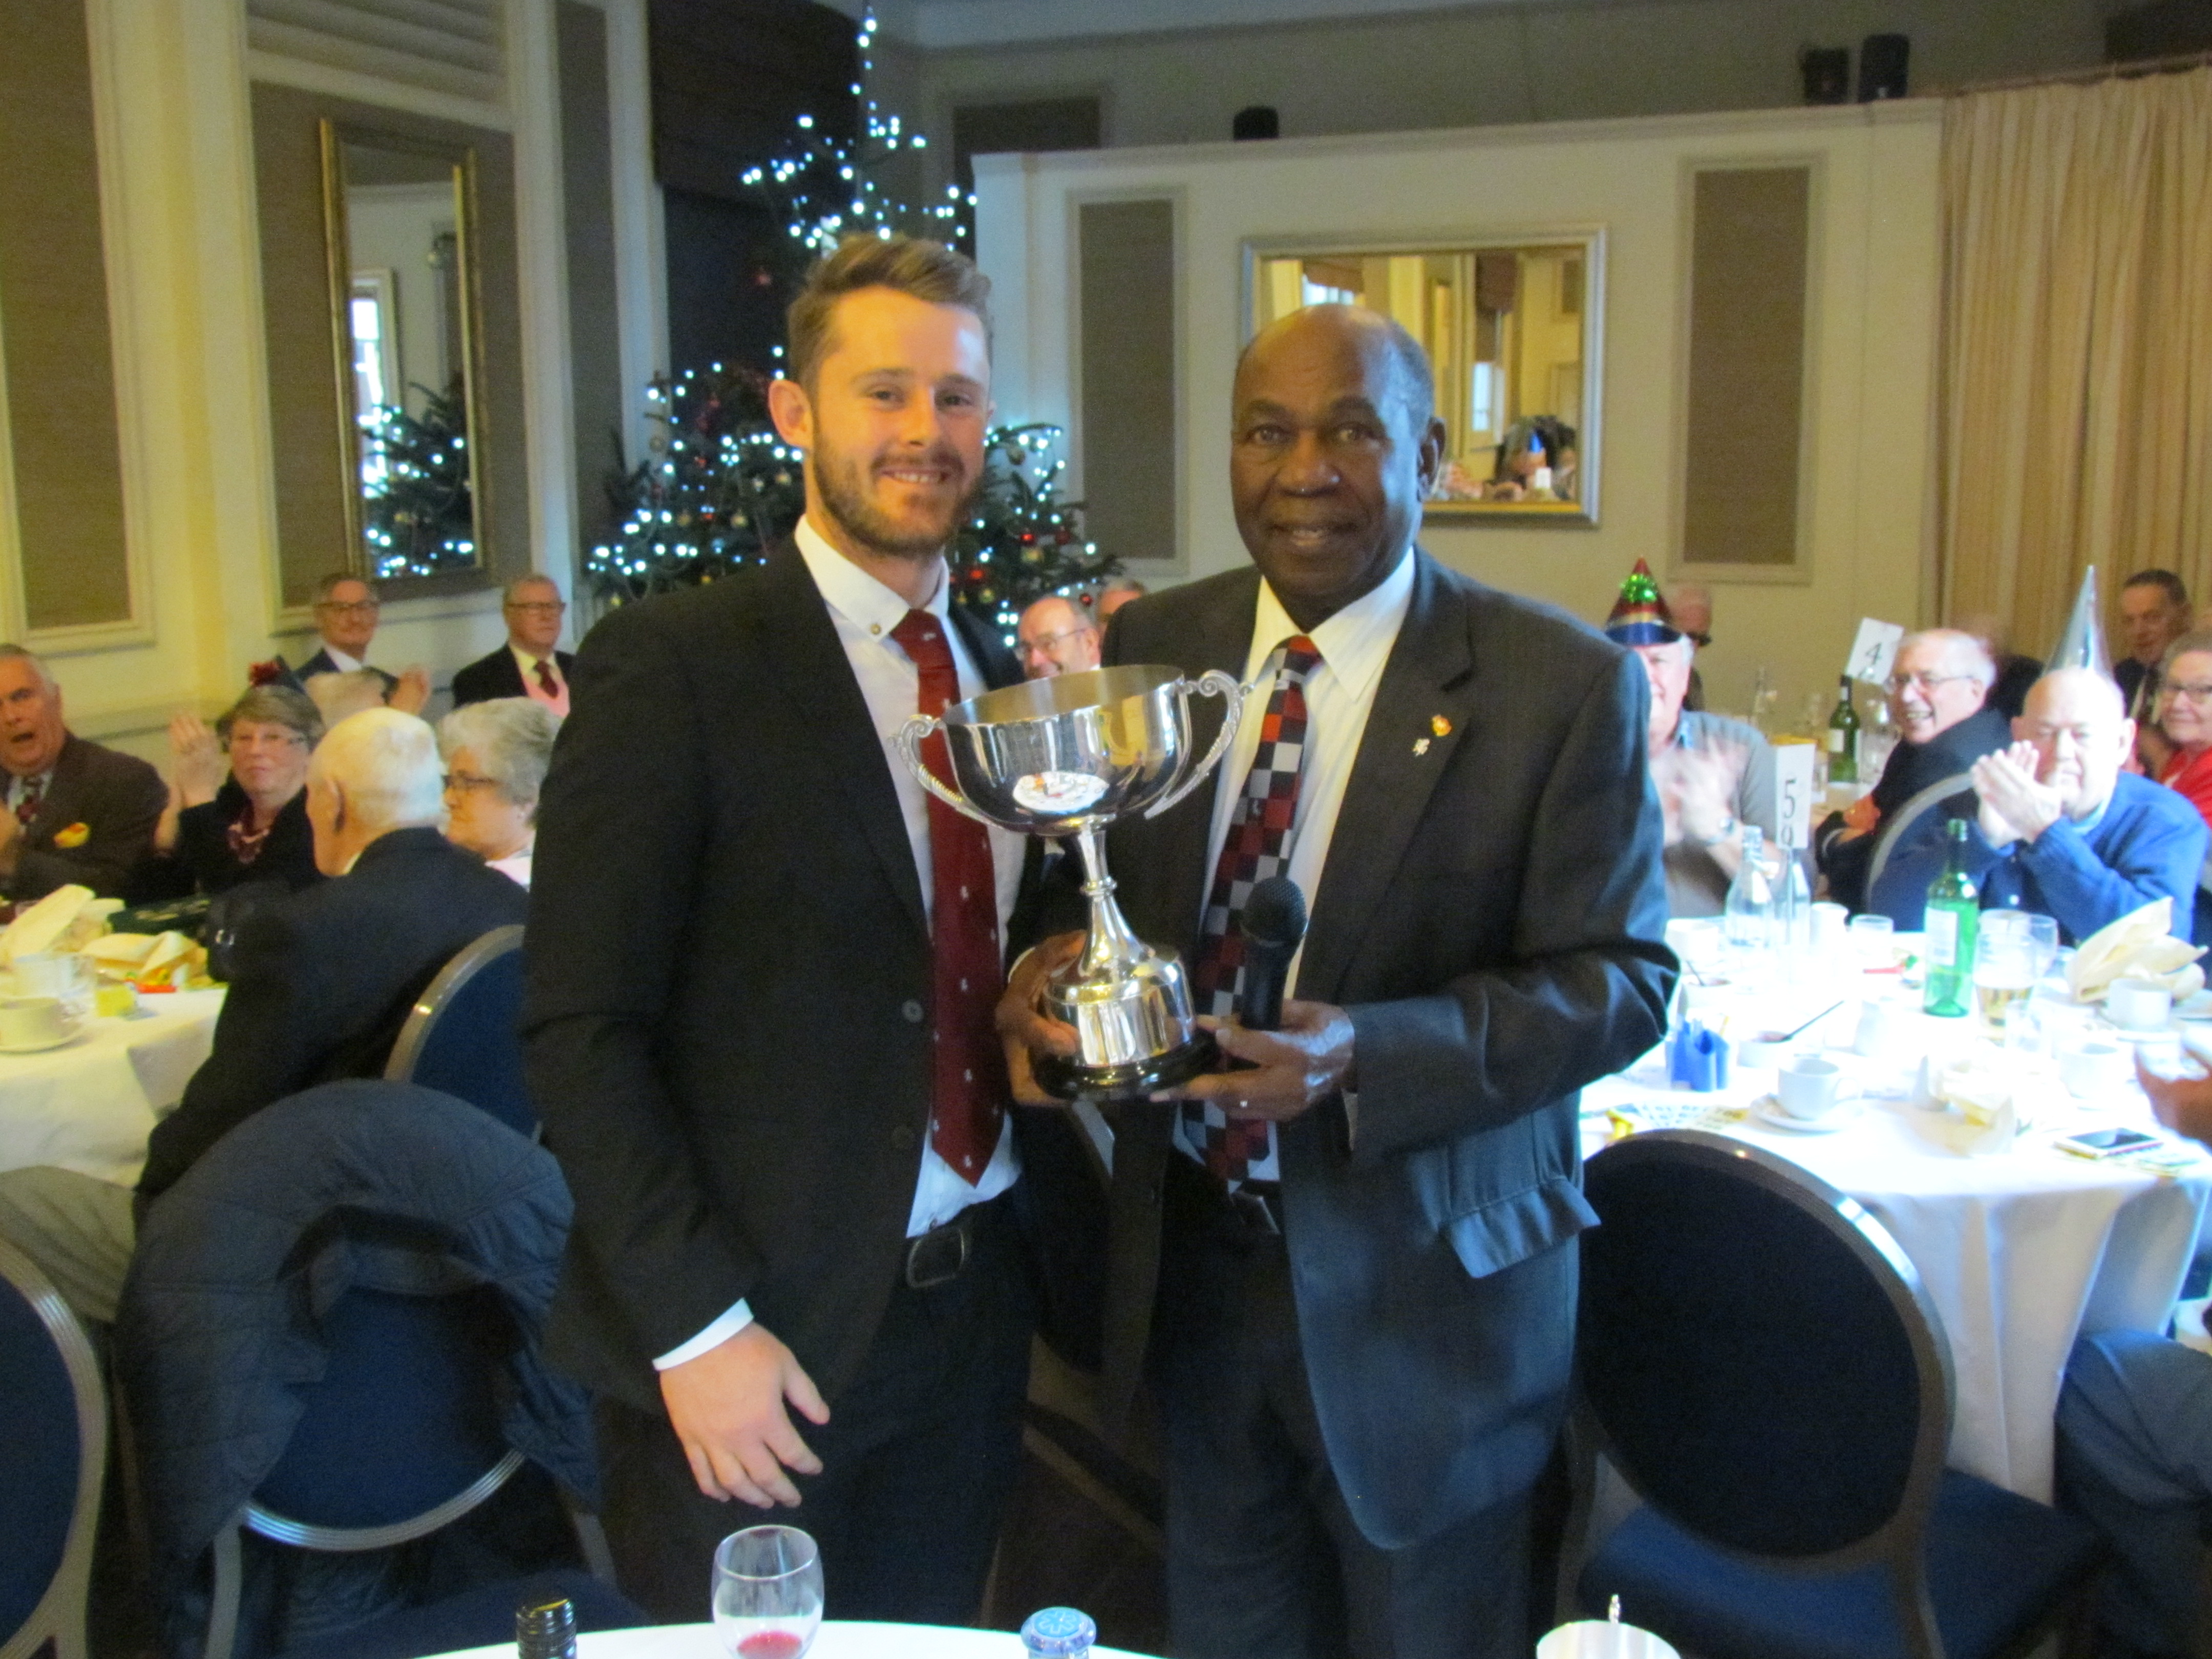 Adam Rouse awarded the President’s Trophy by President John Shepherd at the Club’s Christmas Lunch